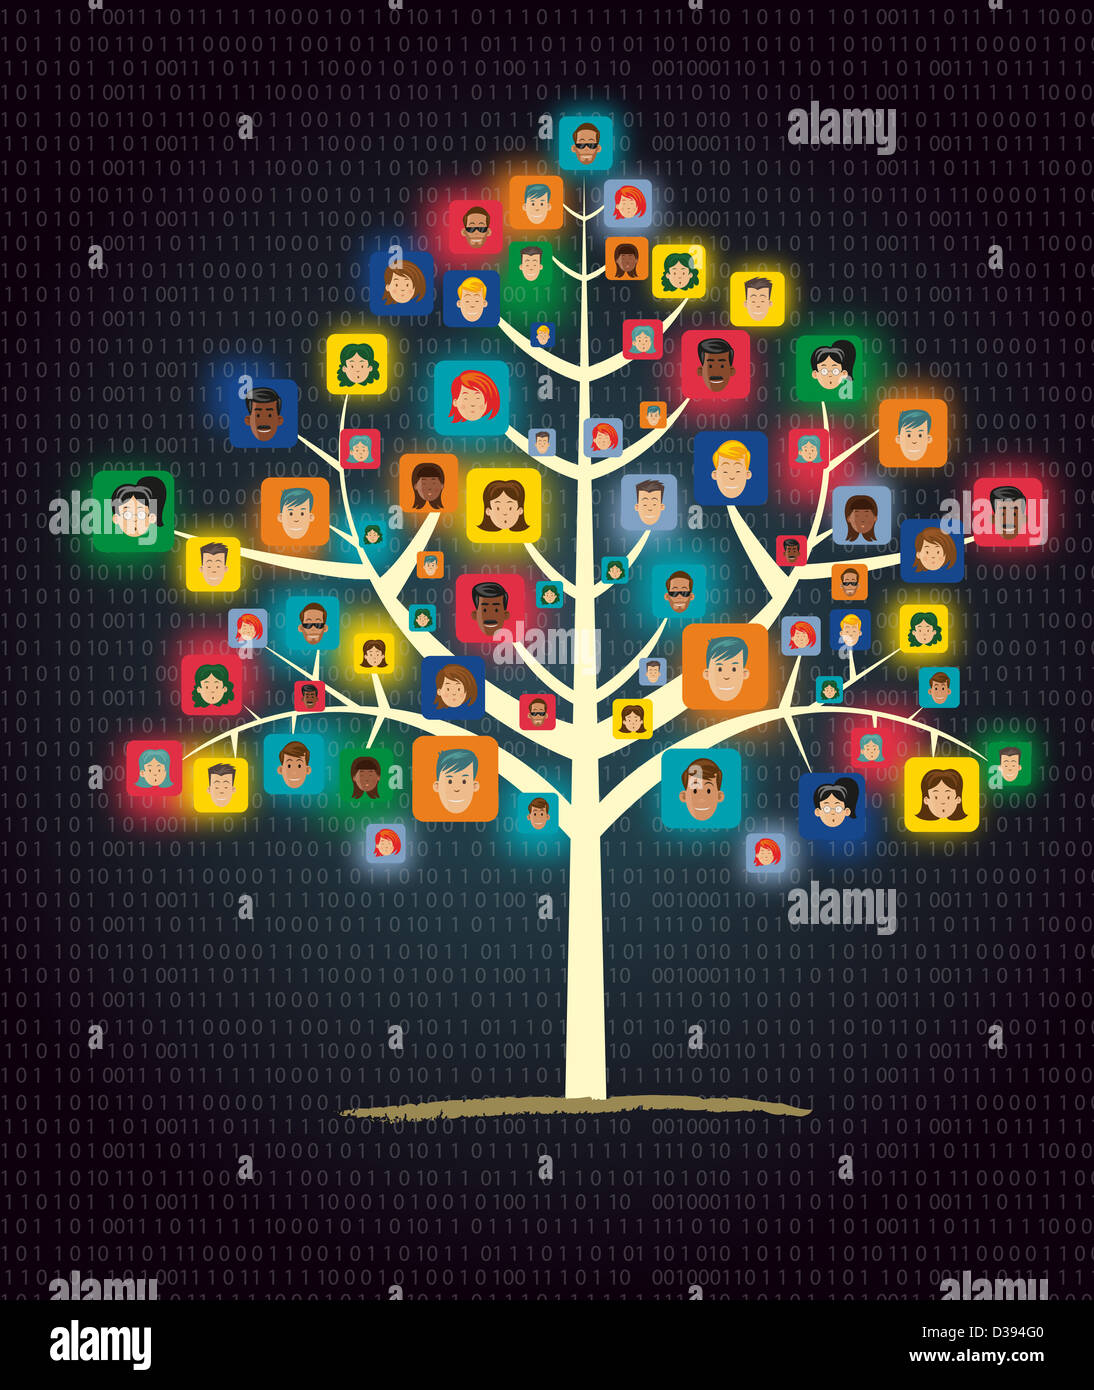 Illustration of networking tree showing human connection Stock Photo